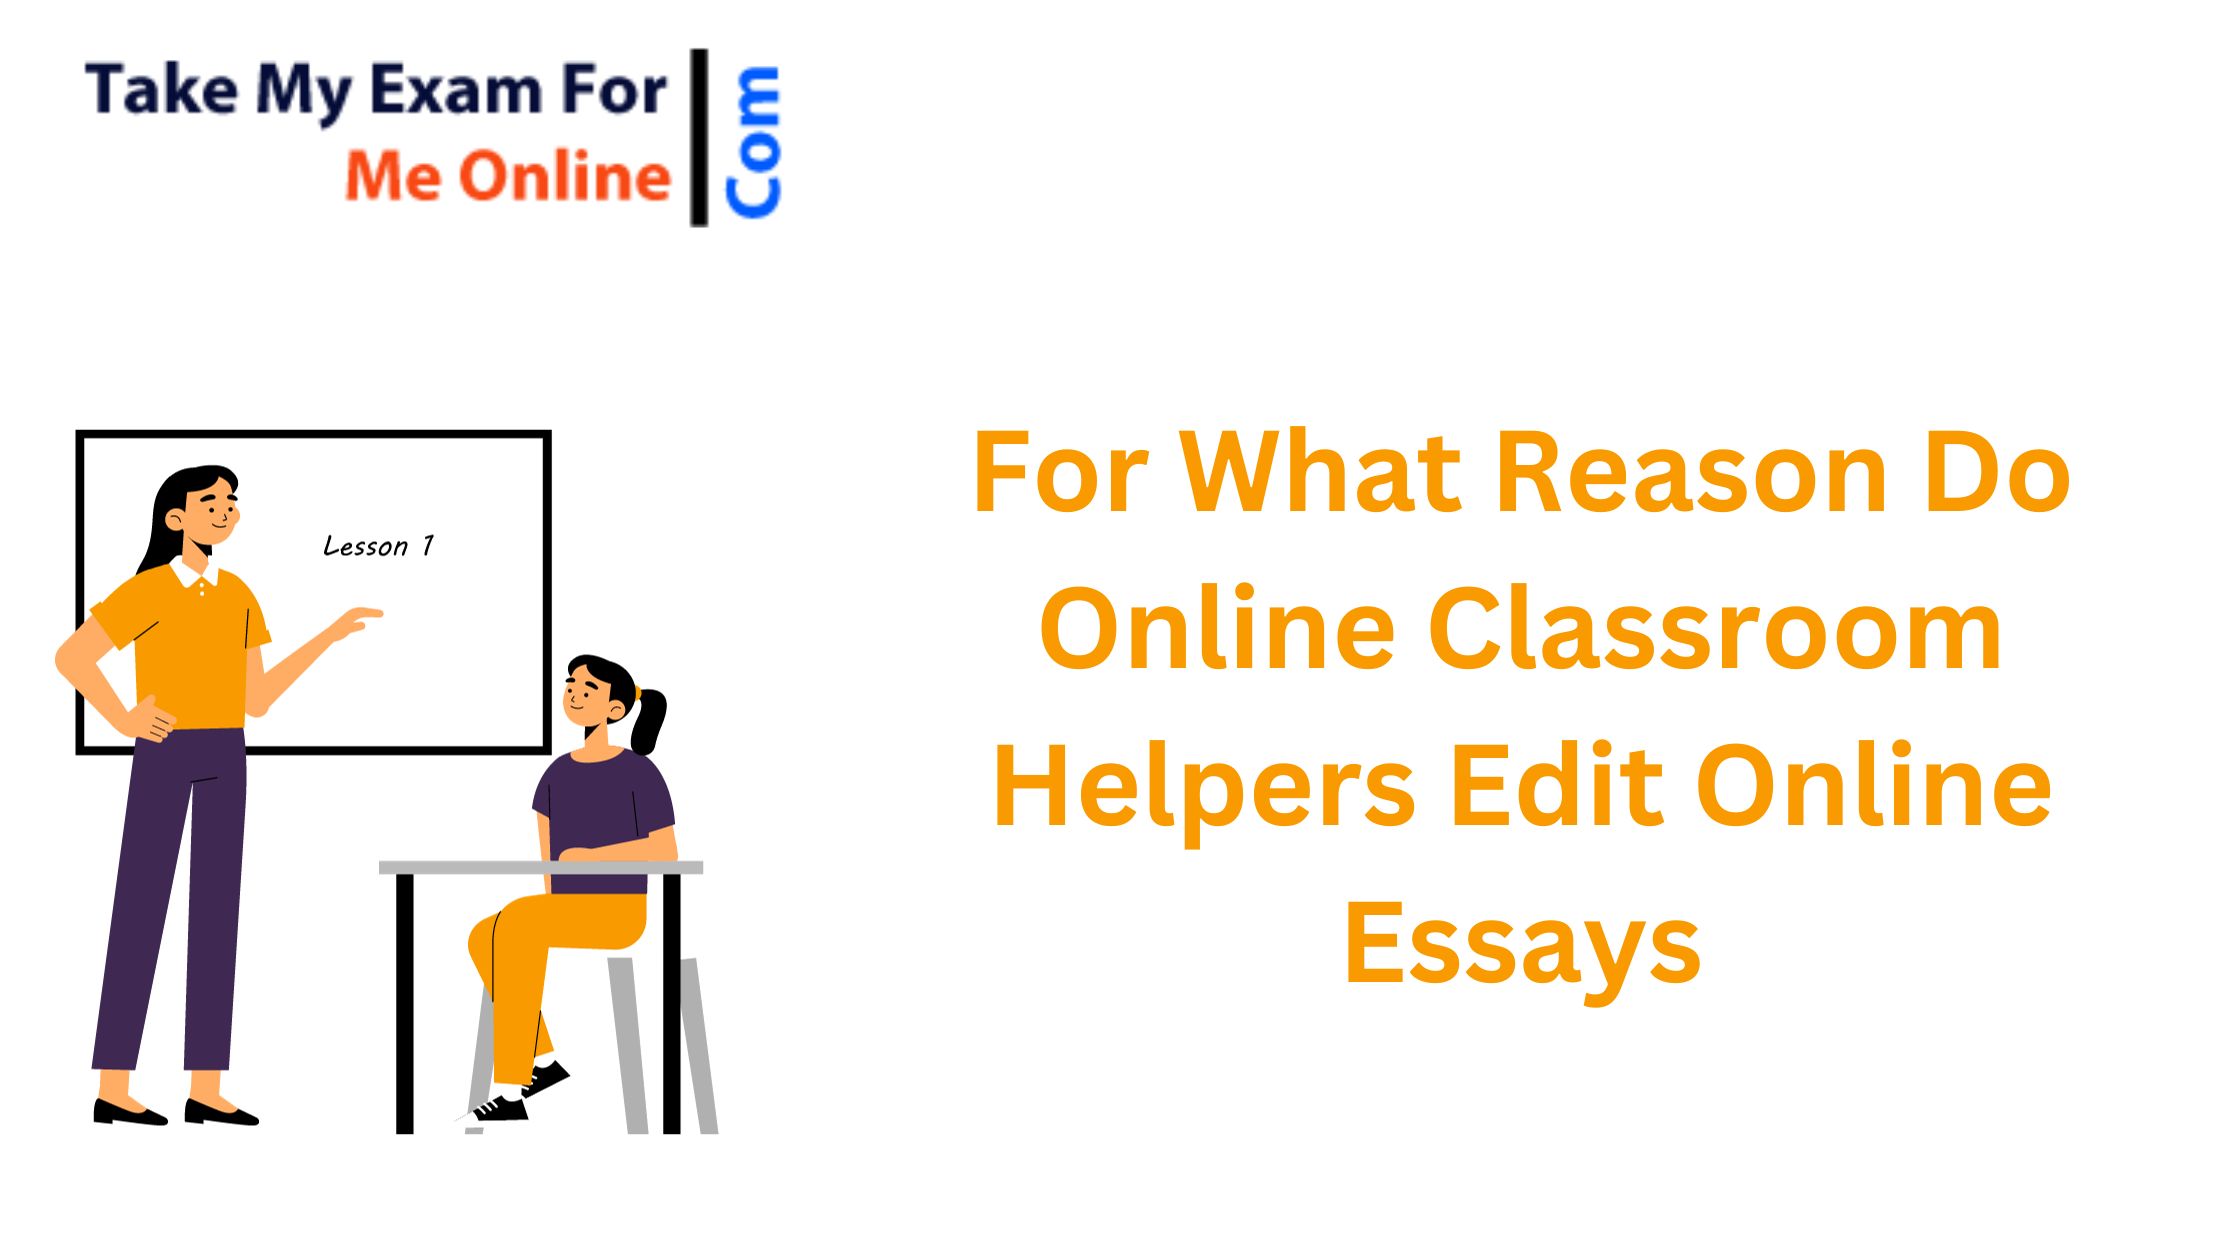 For What Reason Do Online Classroom Helpers Edit Online Essays